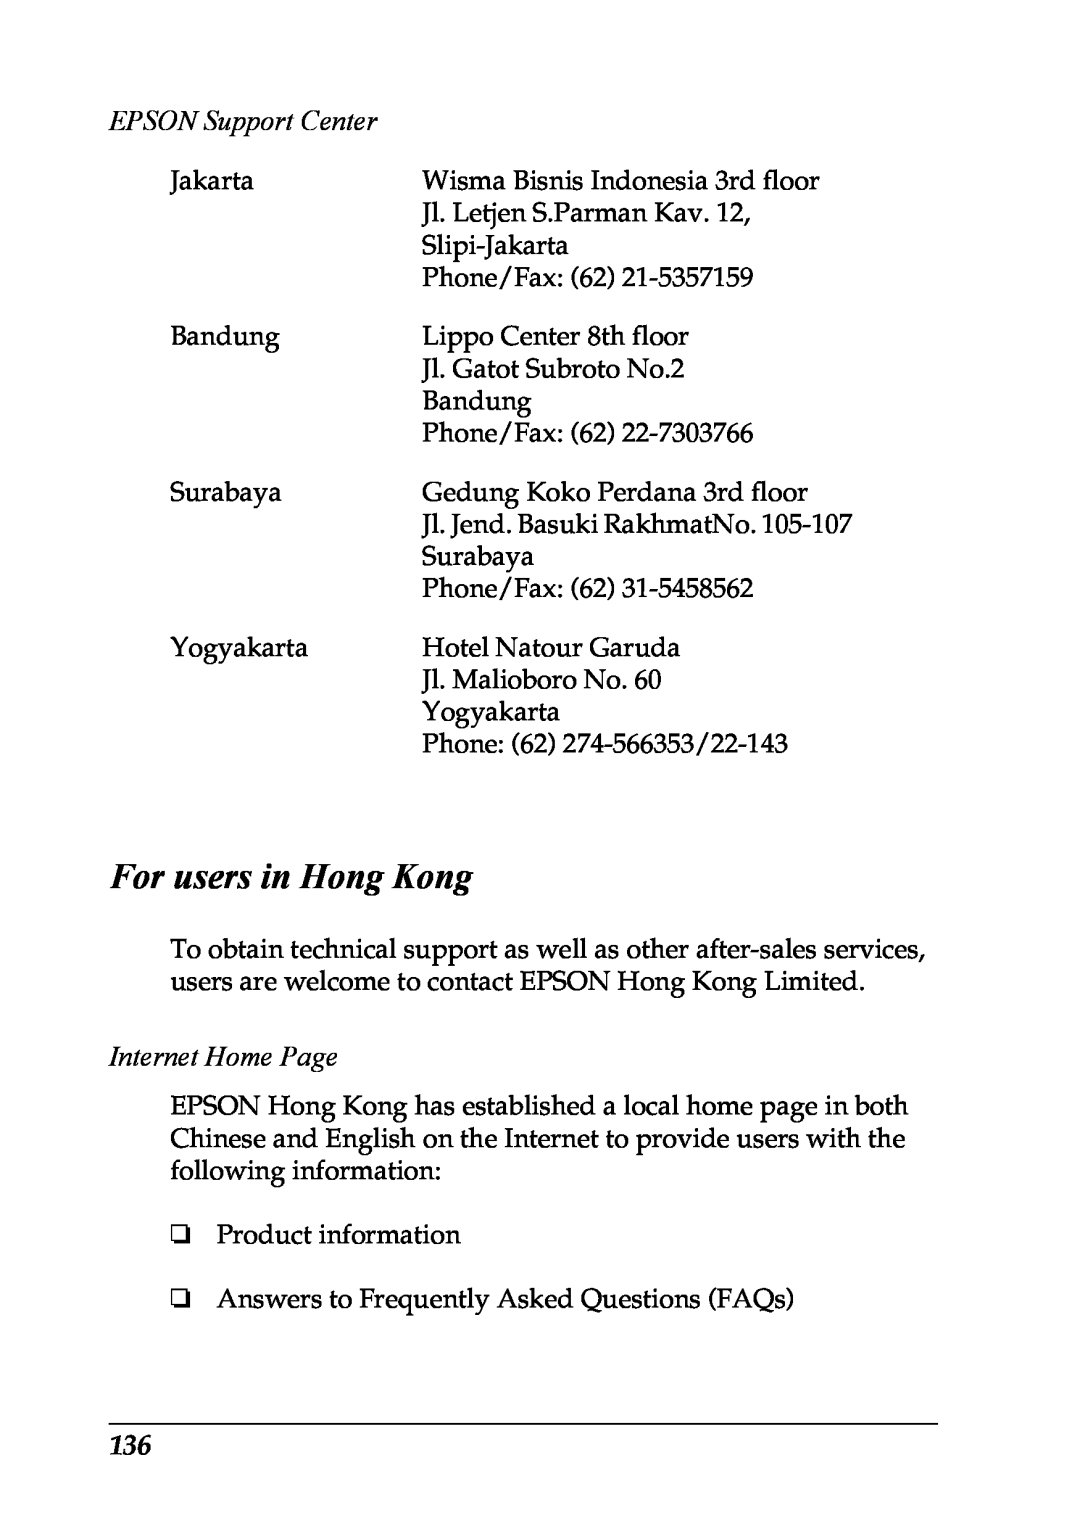 Epson LX-1170 manual For users in Hong Kong, EPSON Support Center, Internet Home Page 